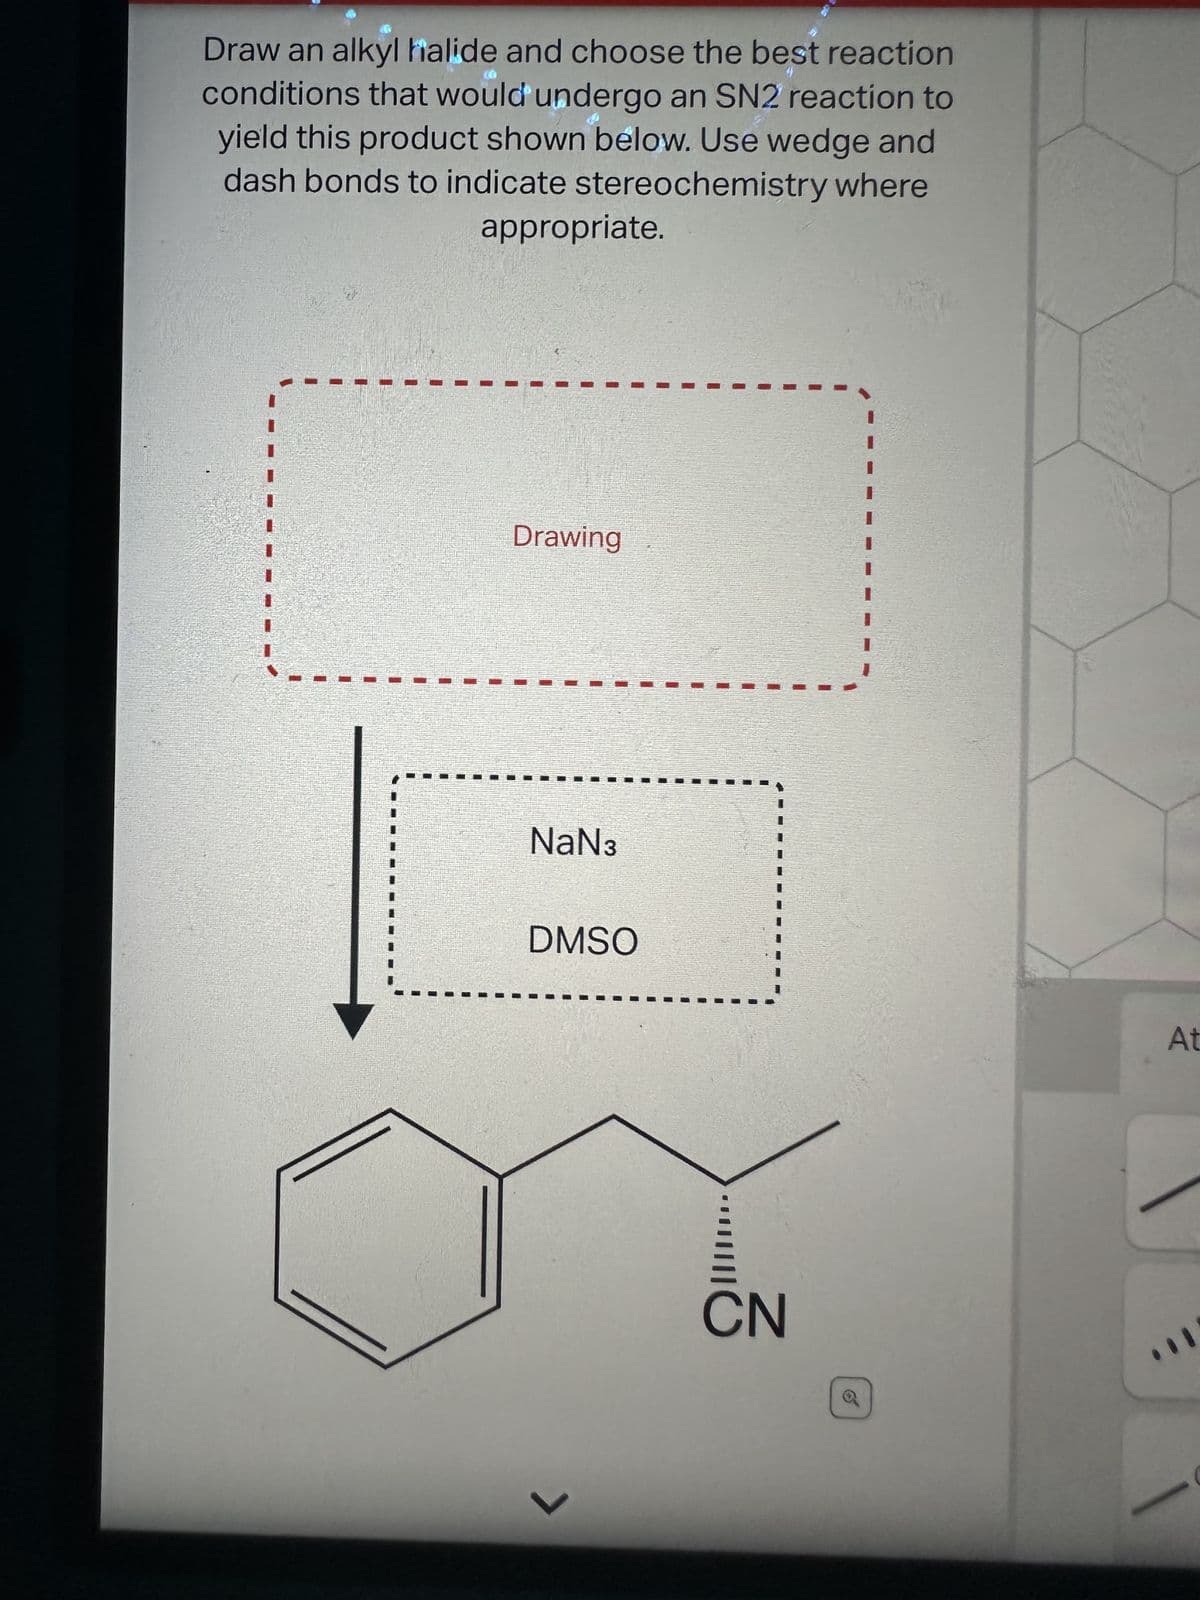 Draw an alkyl halide and choose the best reaction
conditions that would undergo an SN2 reaction to
yield this product shown below. Use wedge and
dash bonds to indicate stereochemistry where
#
appropriate.
Drawing
NaN3
DMSO
7
CN
At